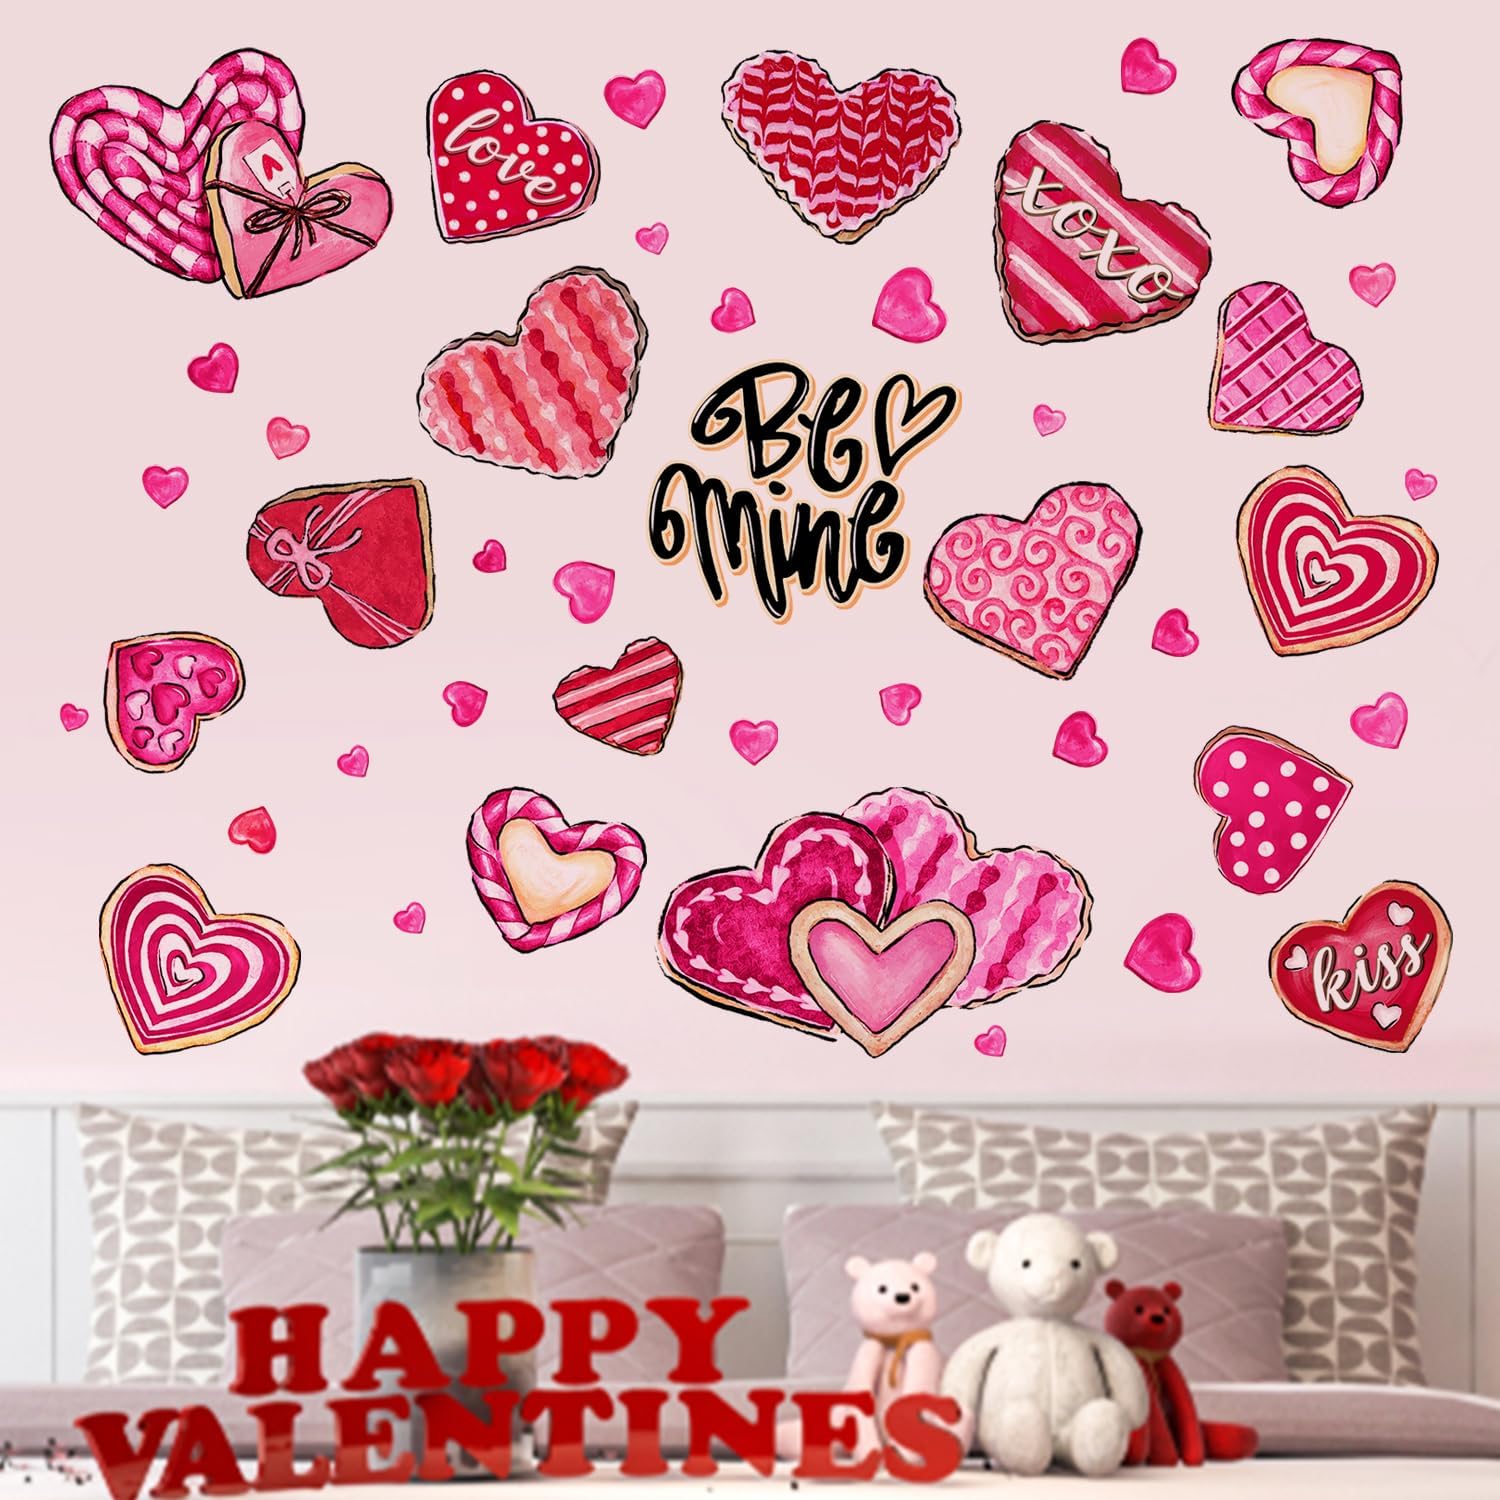 10 Valentine’s Day Decorations to Get You In Love